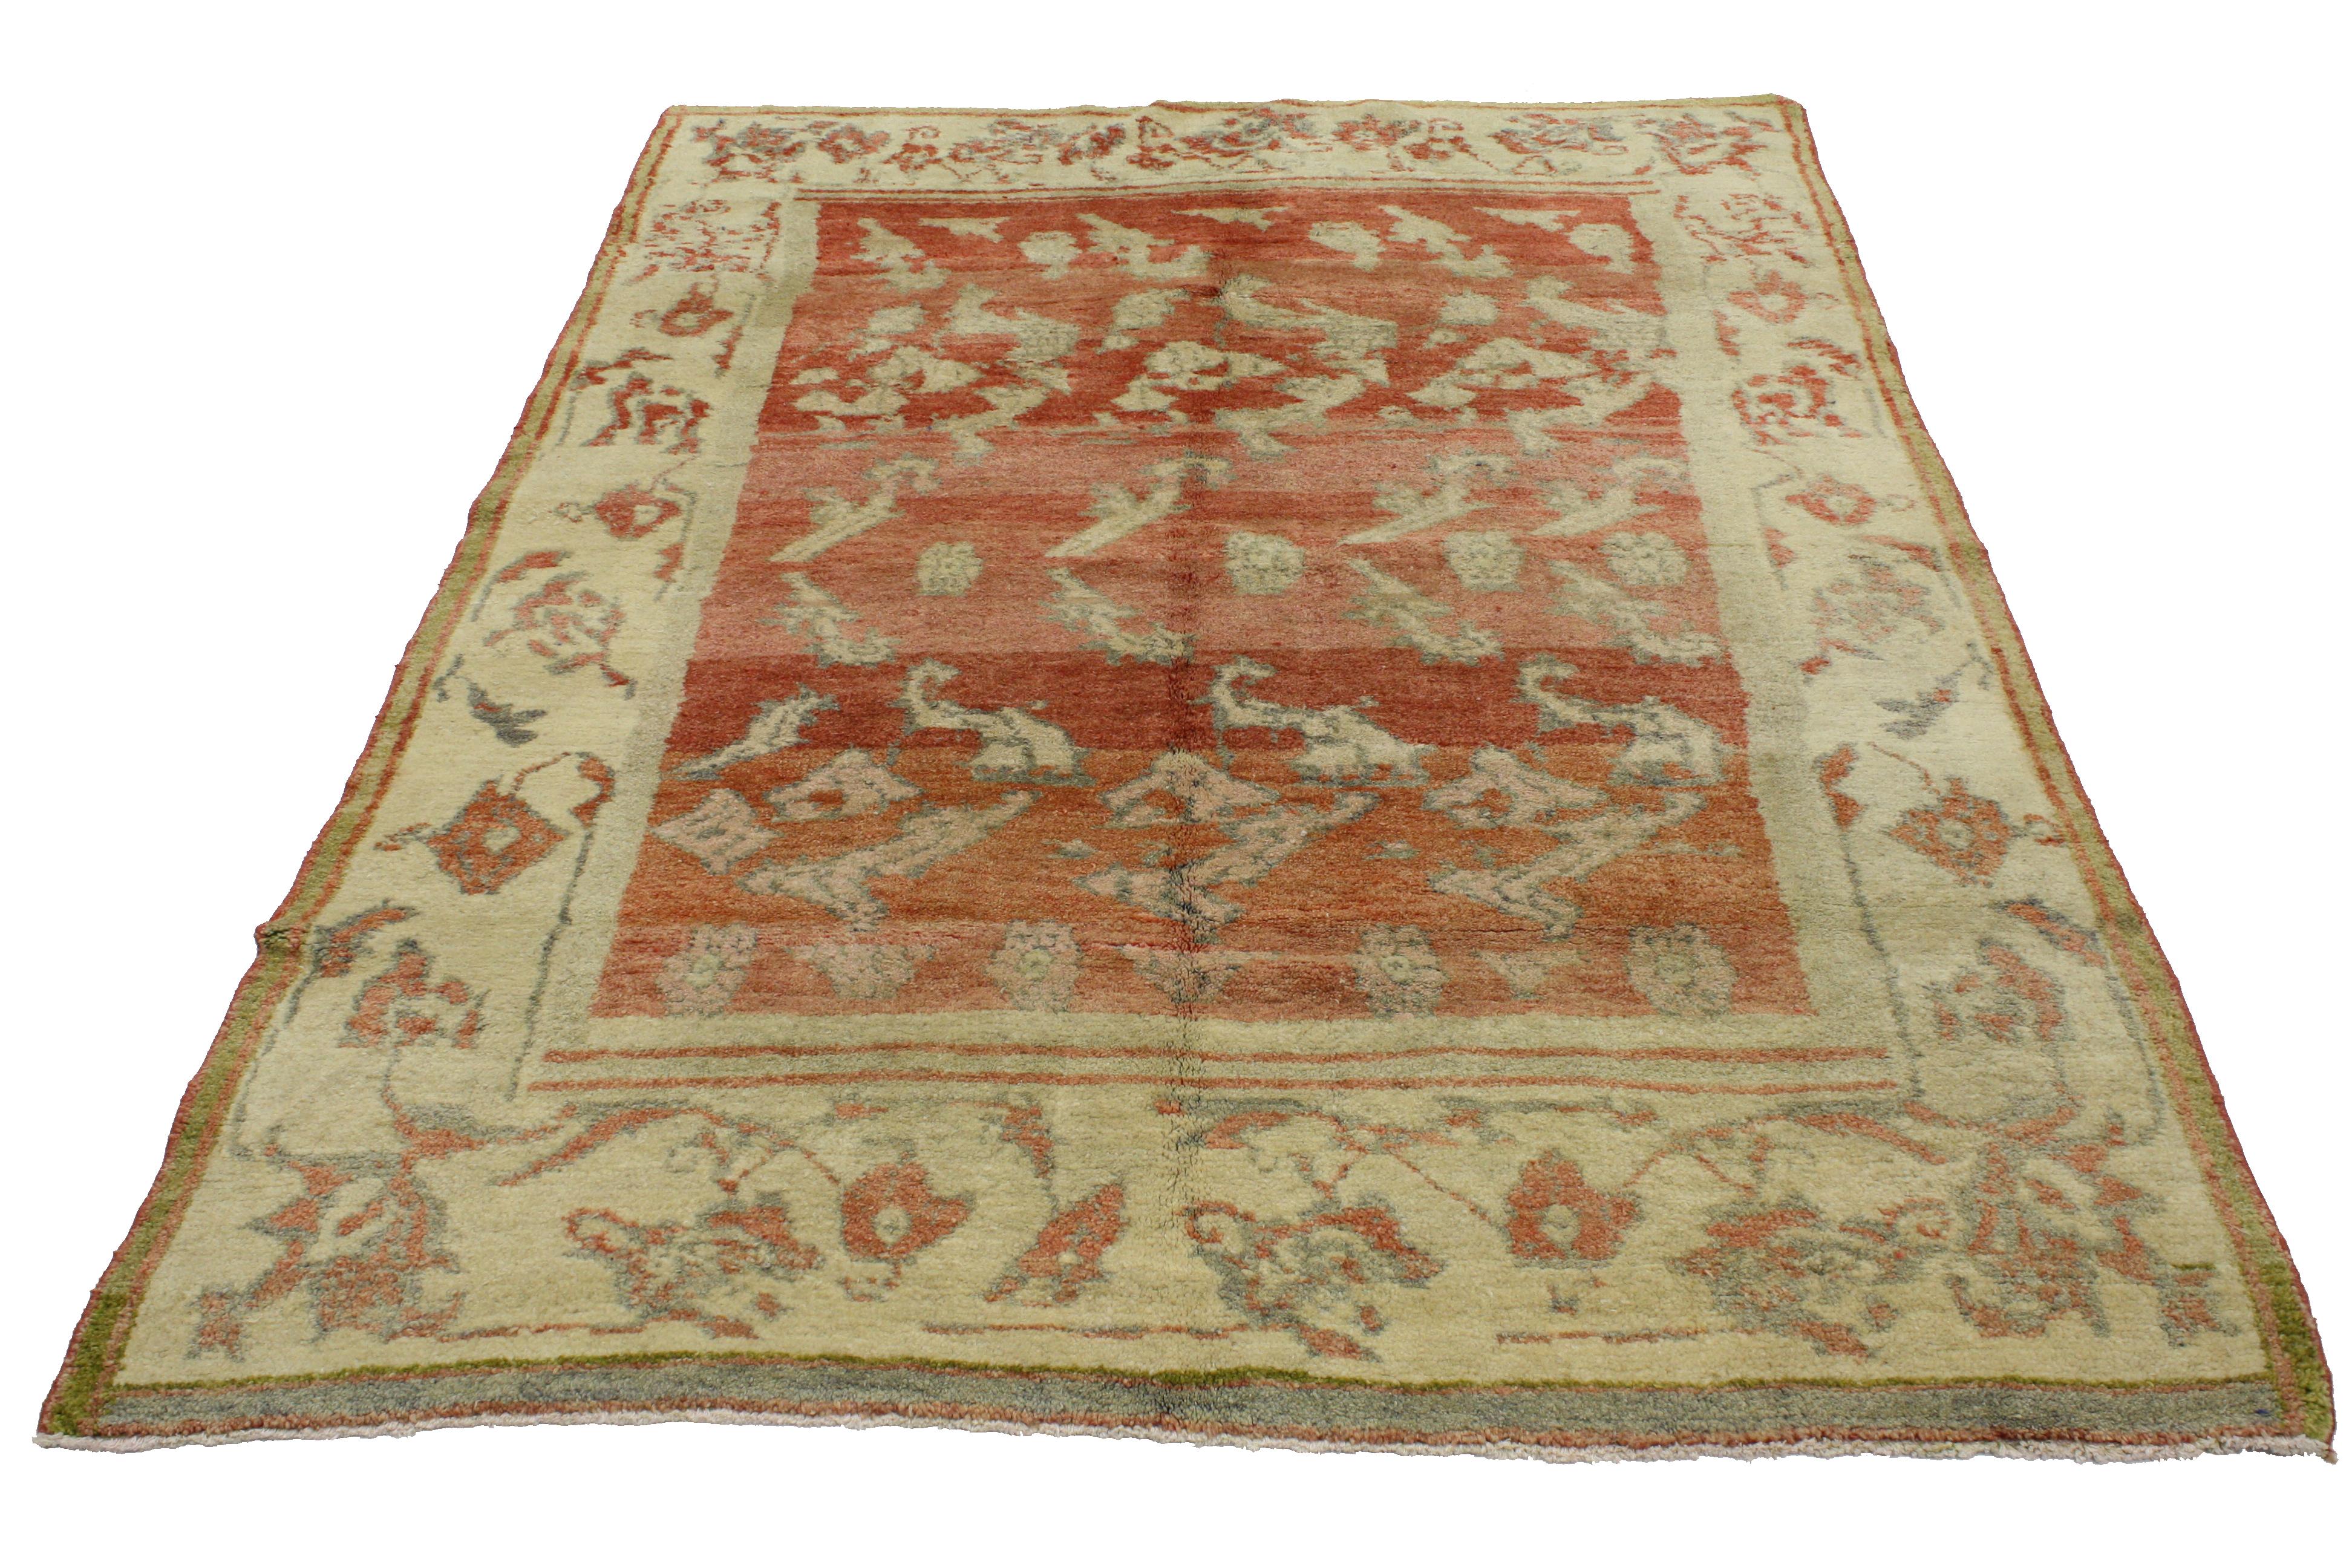 Vintage Turkish Oushak rug with Rustic Prairie Style In Good Condition For Sale In Dallas, TX